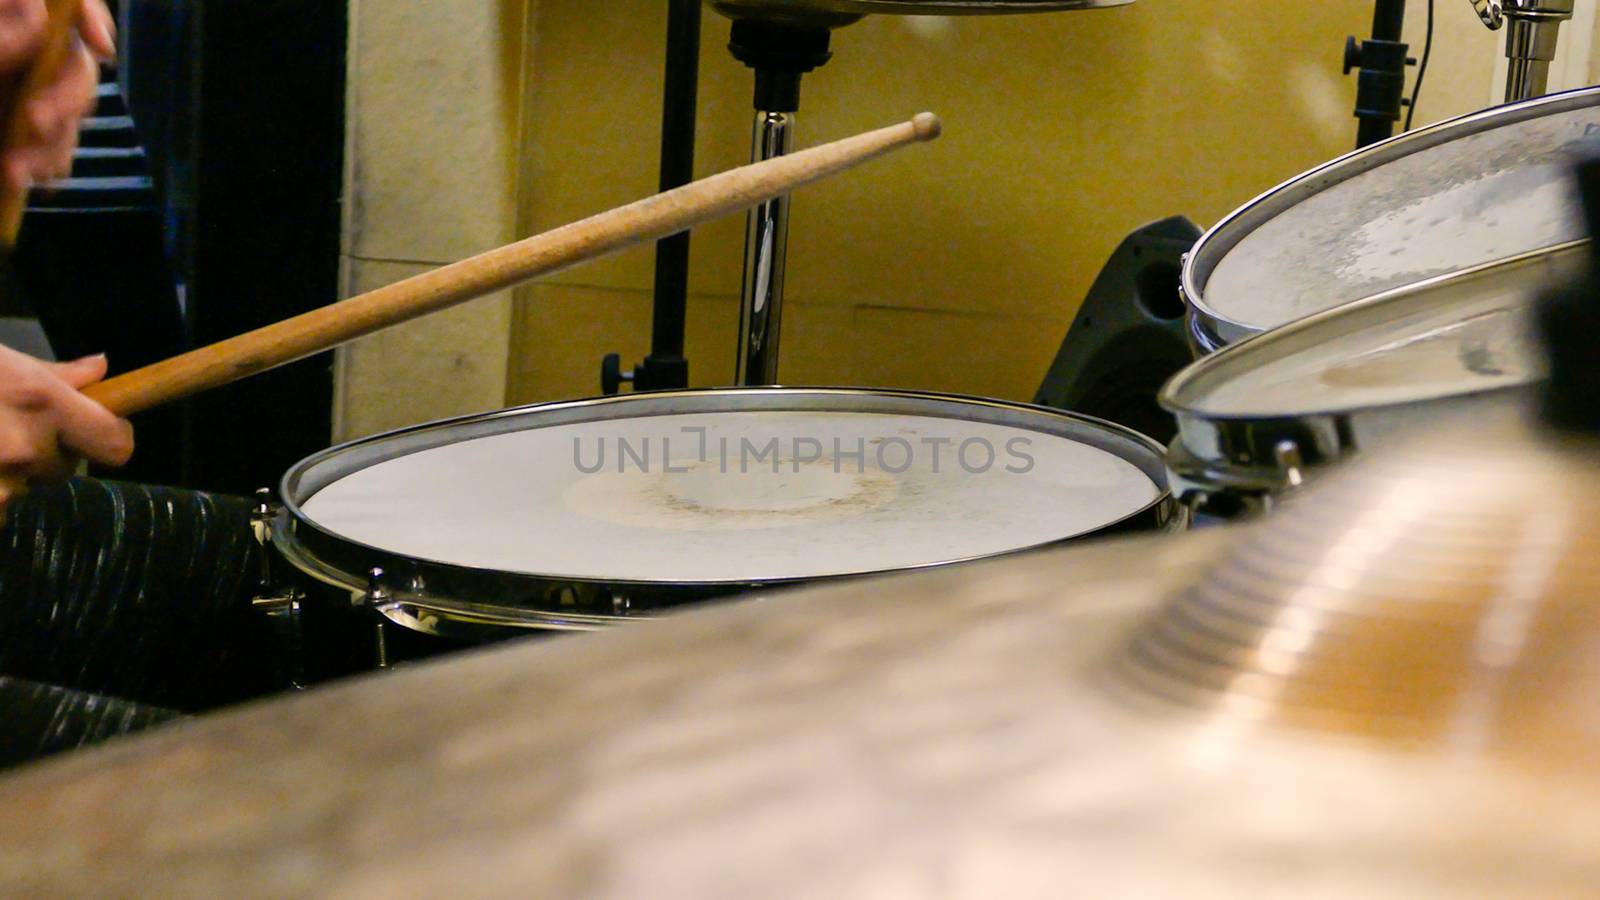 Playing drums on drum kit by imagesbykenny